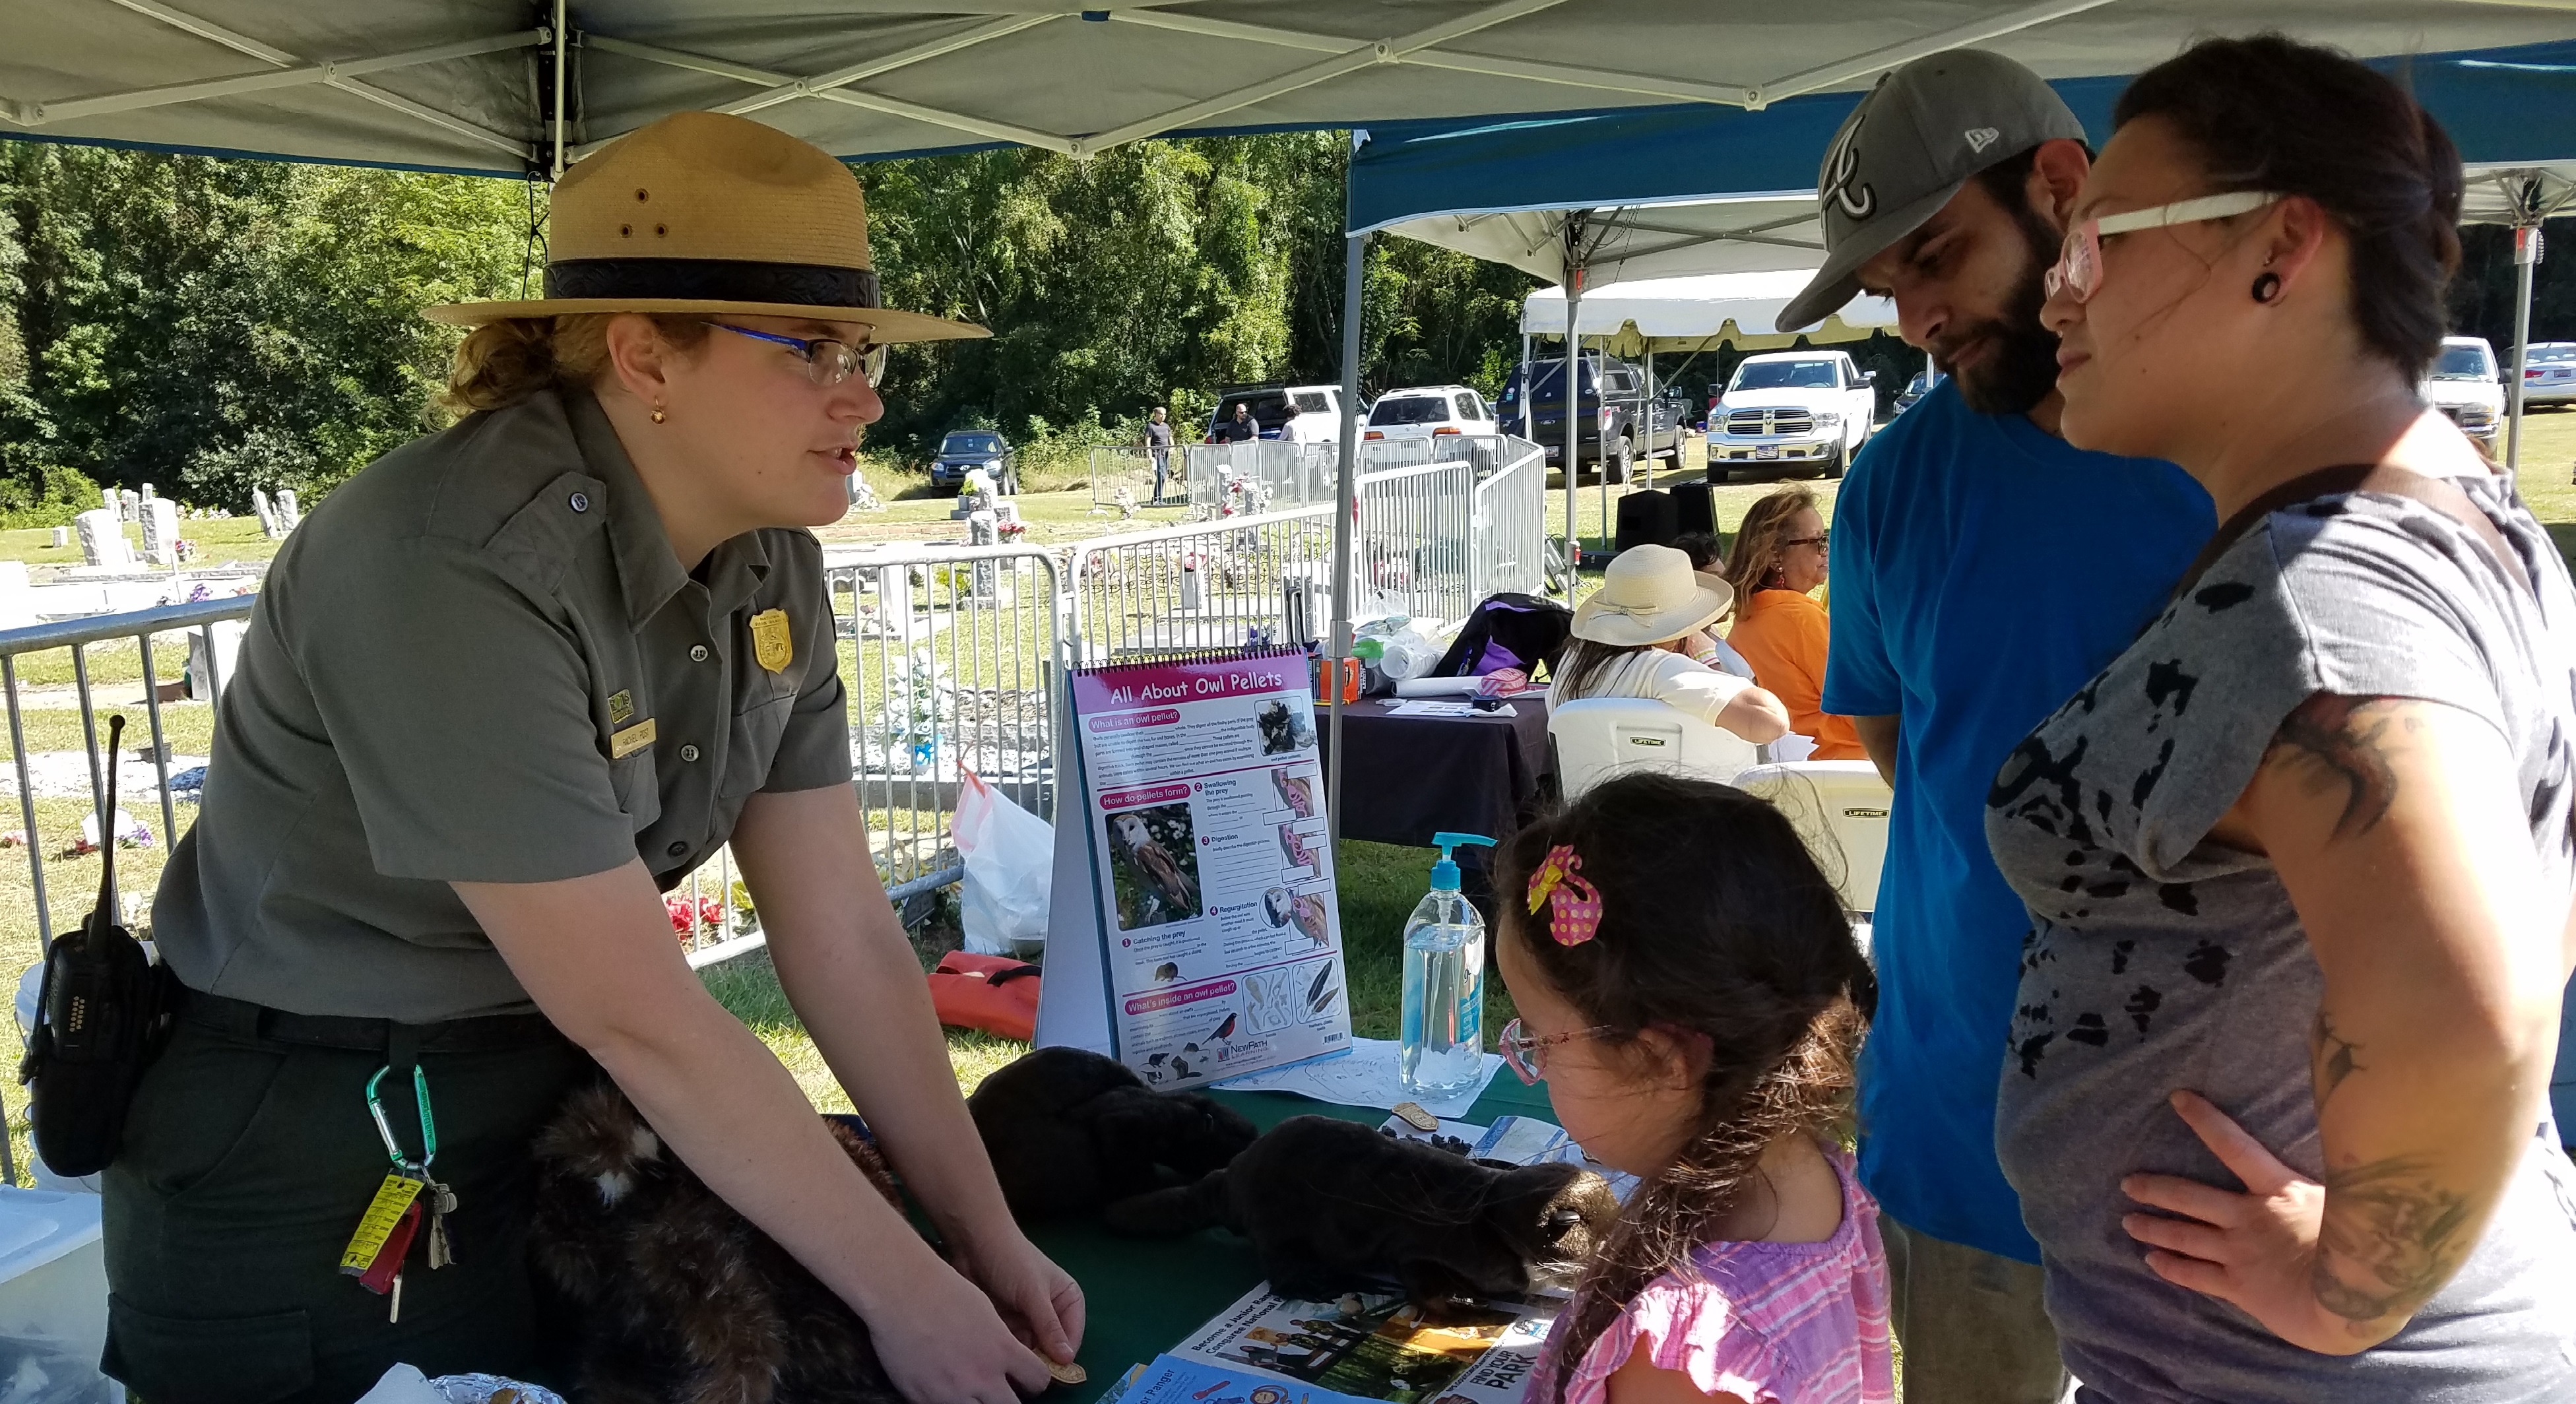 Park Ranger talking with family at special event